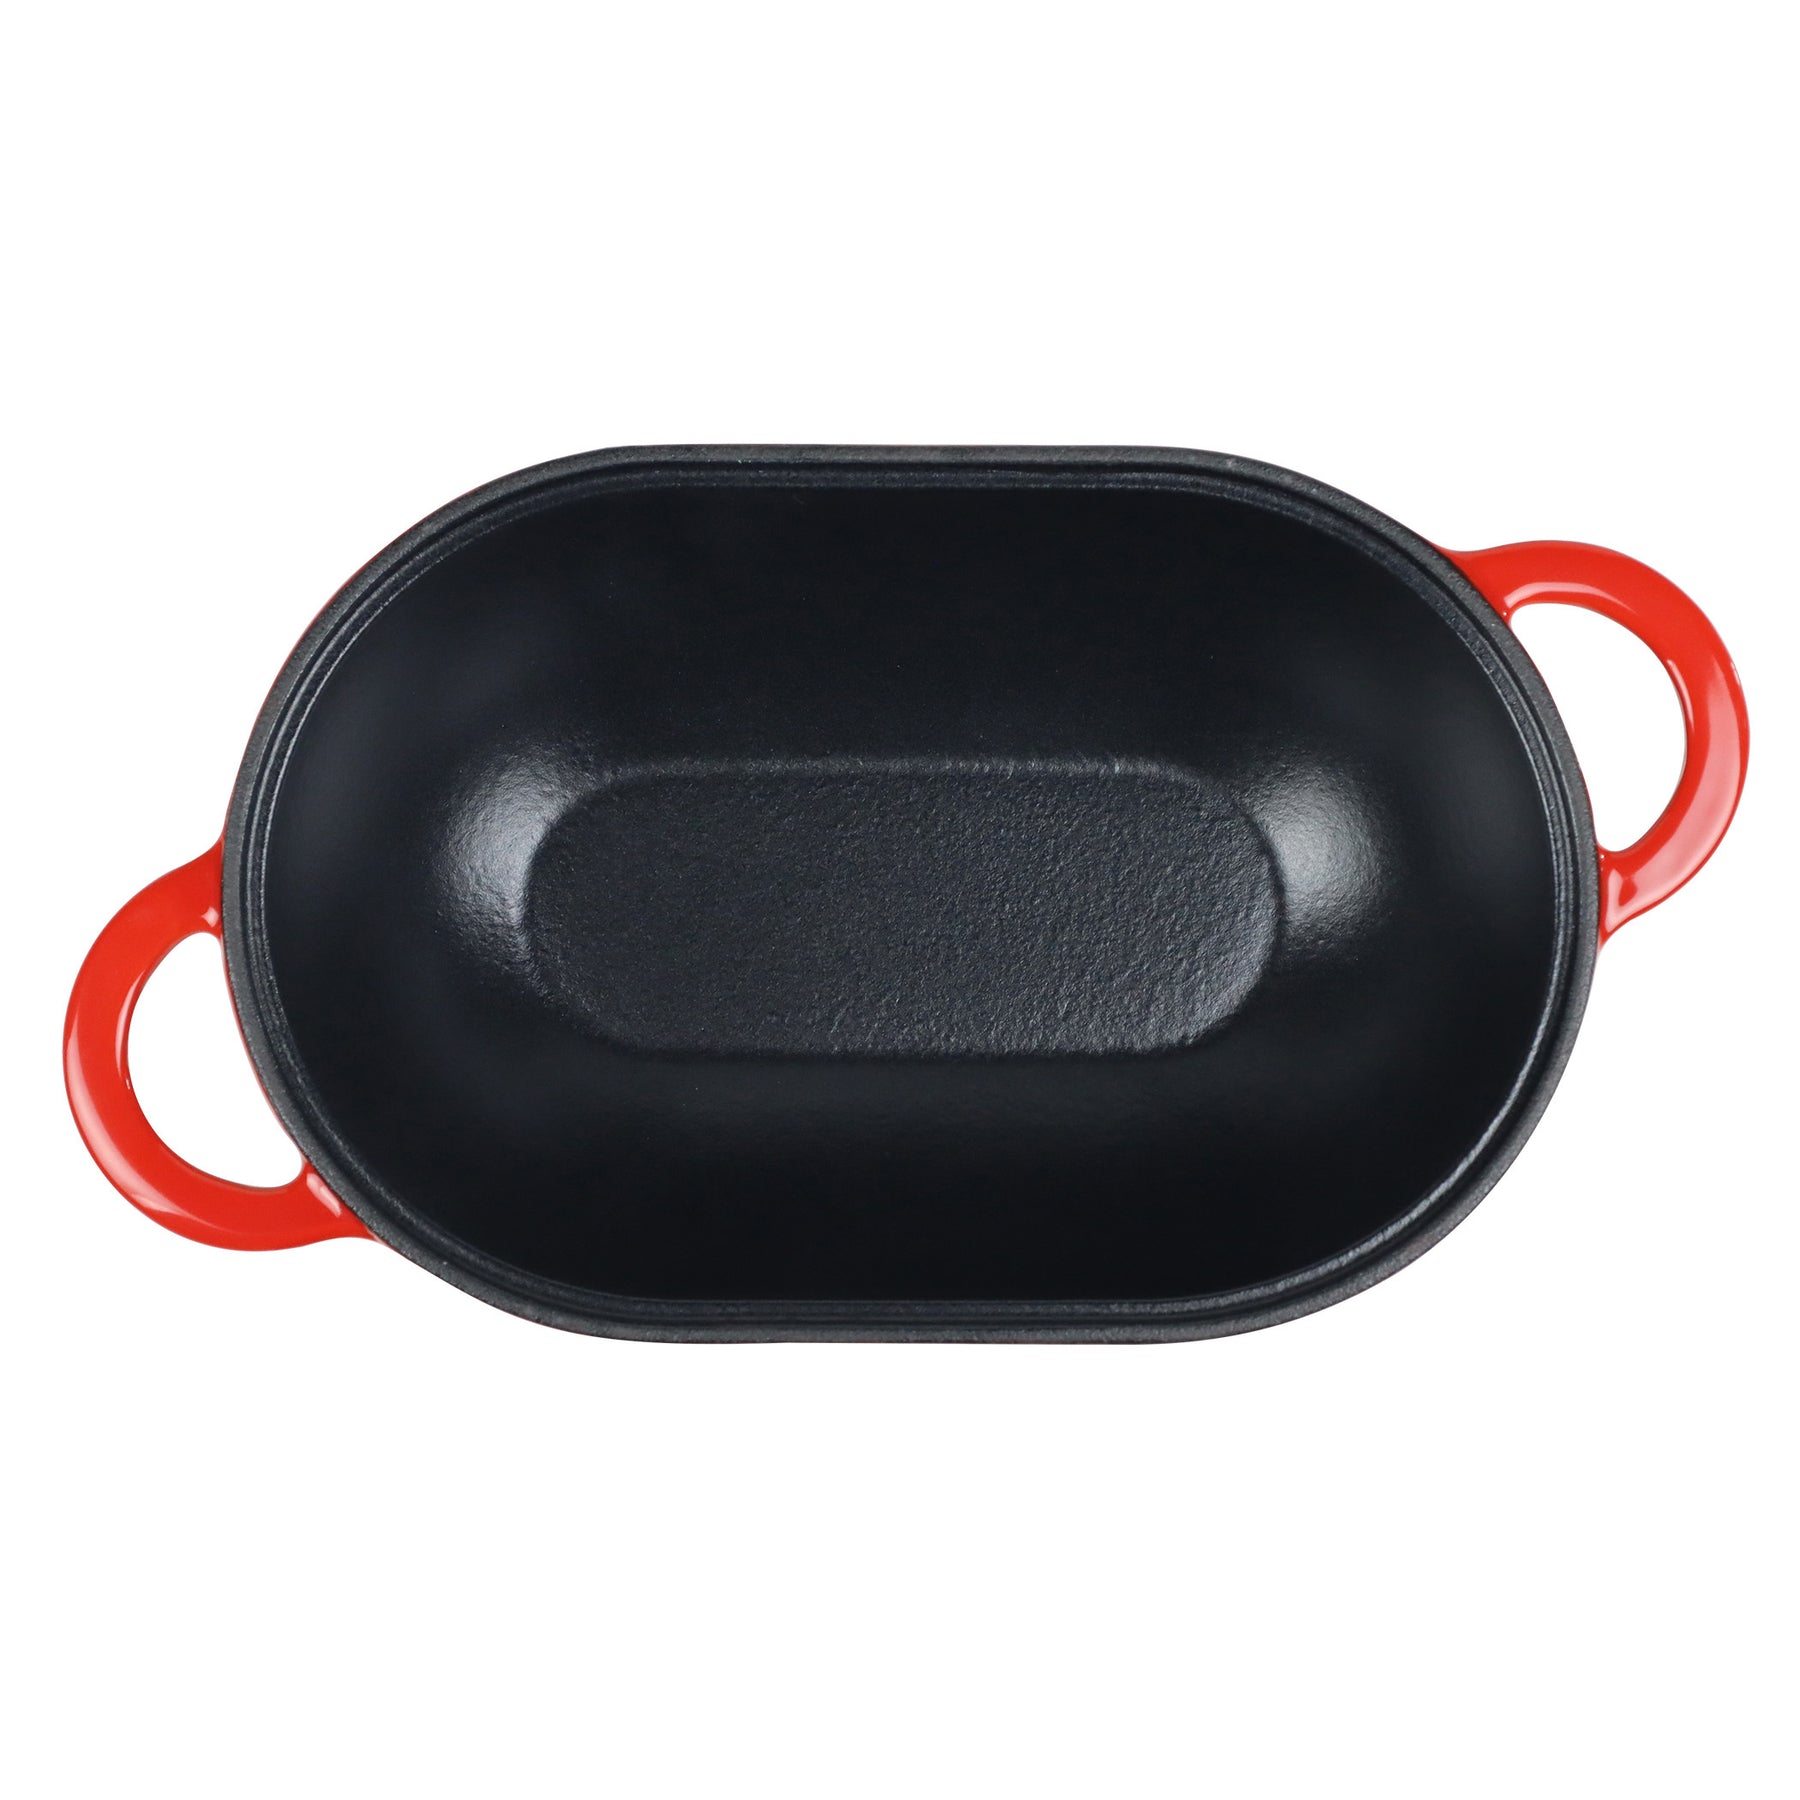 Cast Iron Bread Pan Dutch oven with Lid – Oven Safe Form for